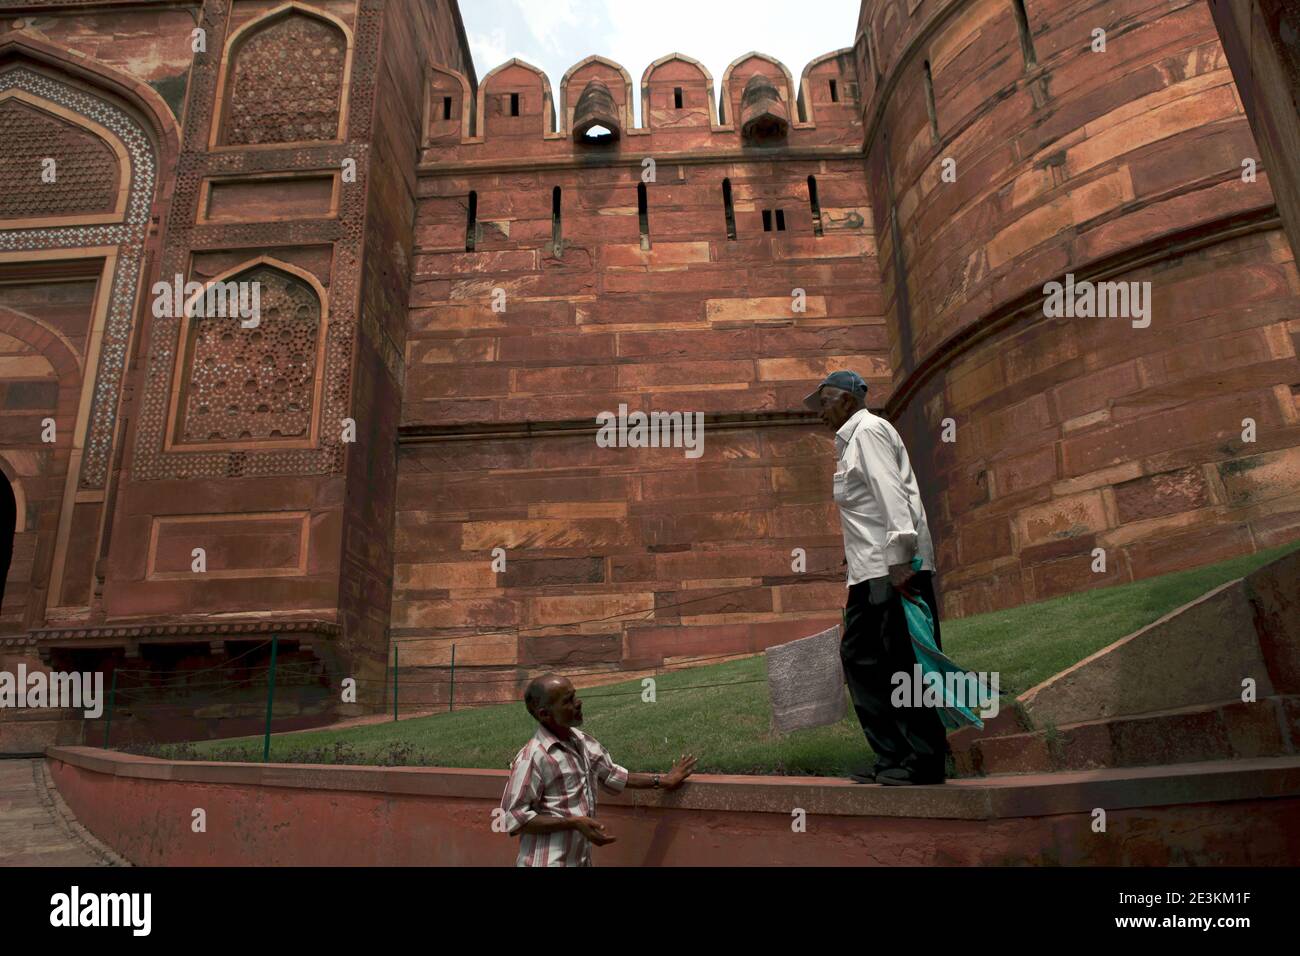 Men having conversation at the lawn before the Amar Singh Gate of Agra Fort in Agra, Uttar Pradesh, India. Stock Photo